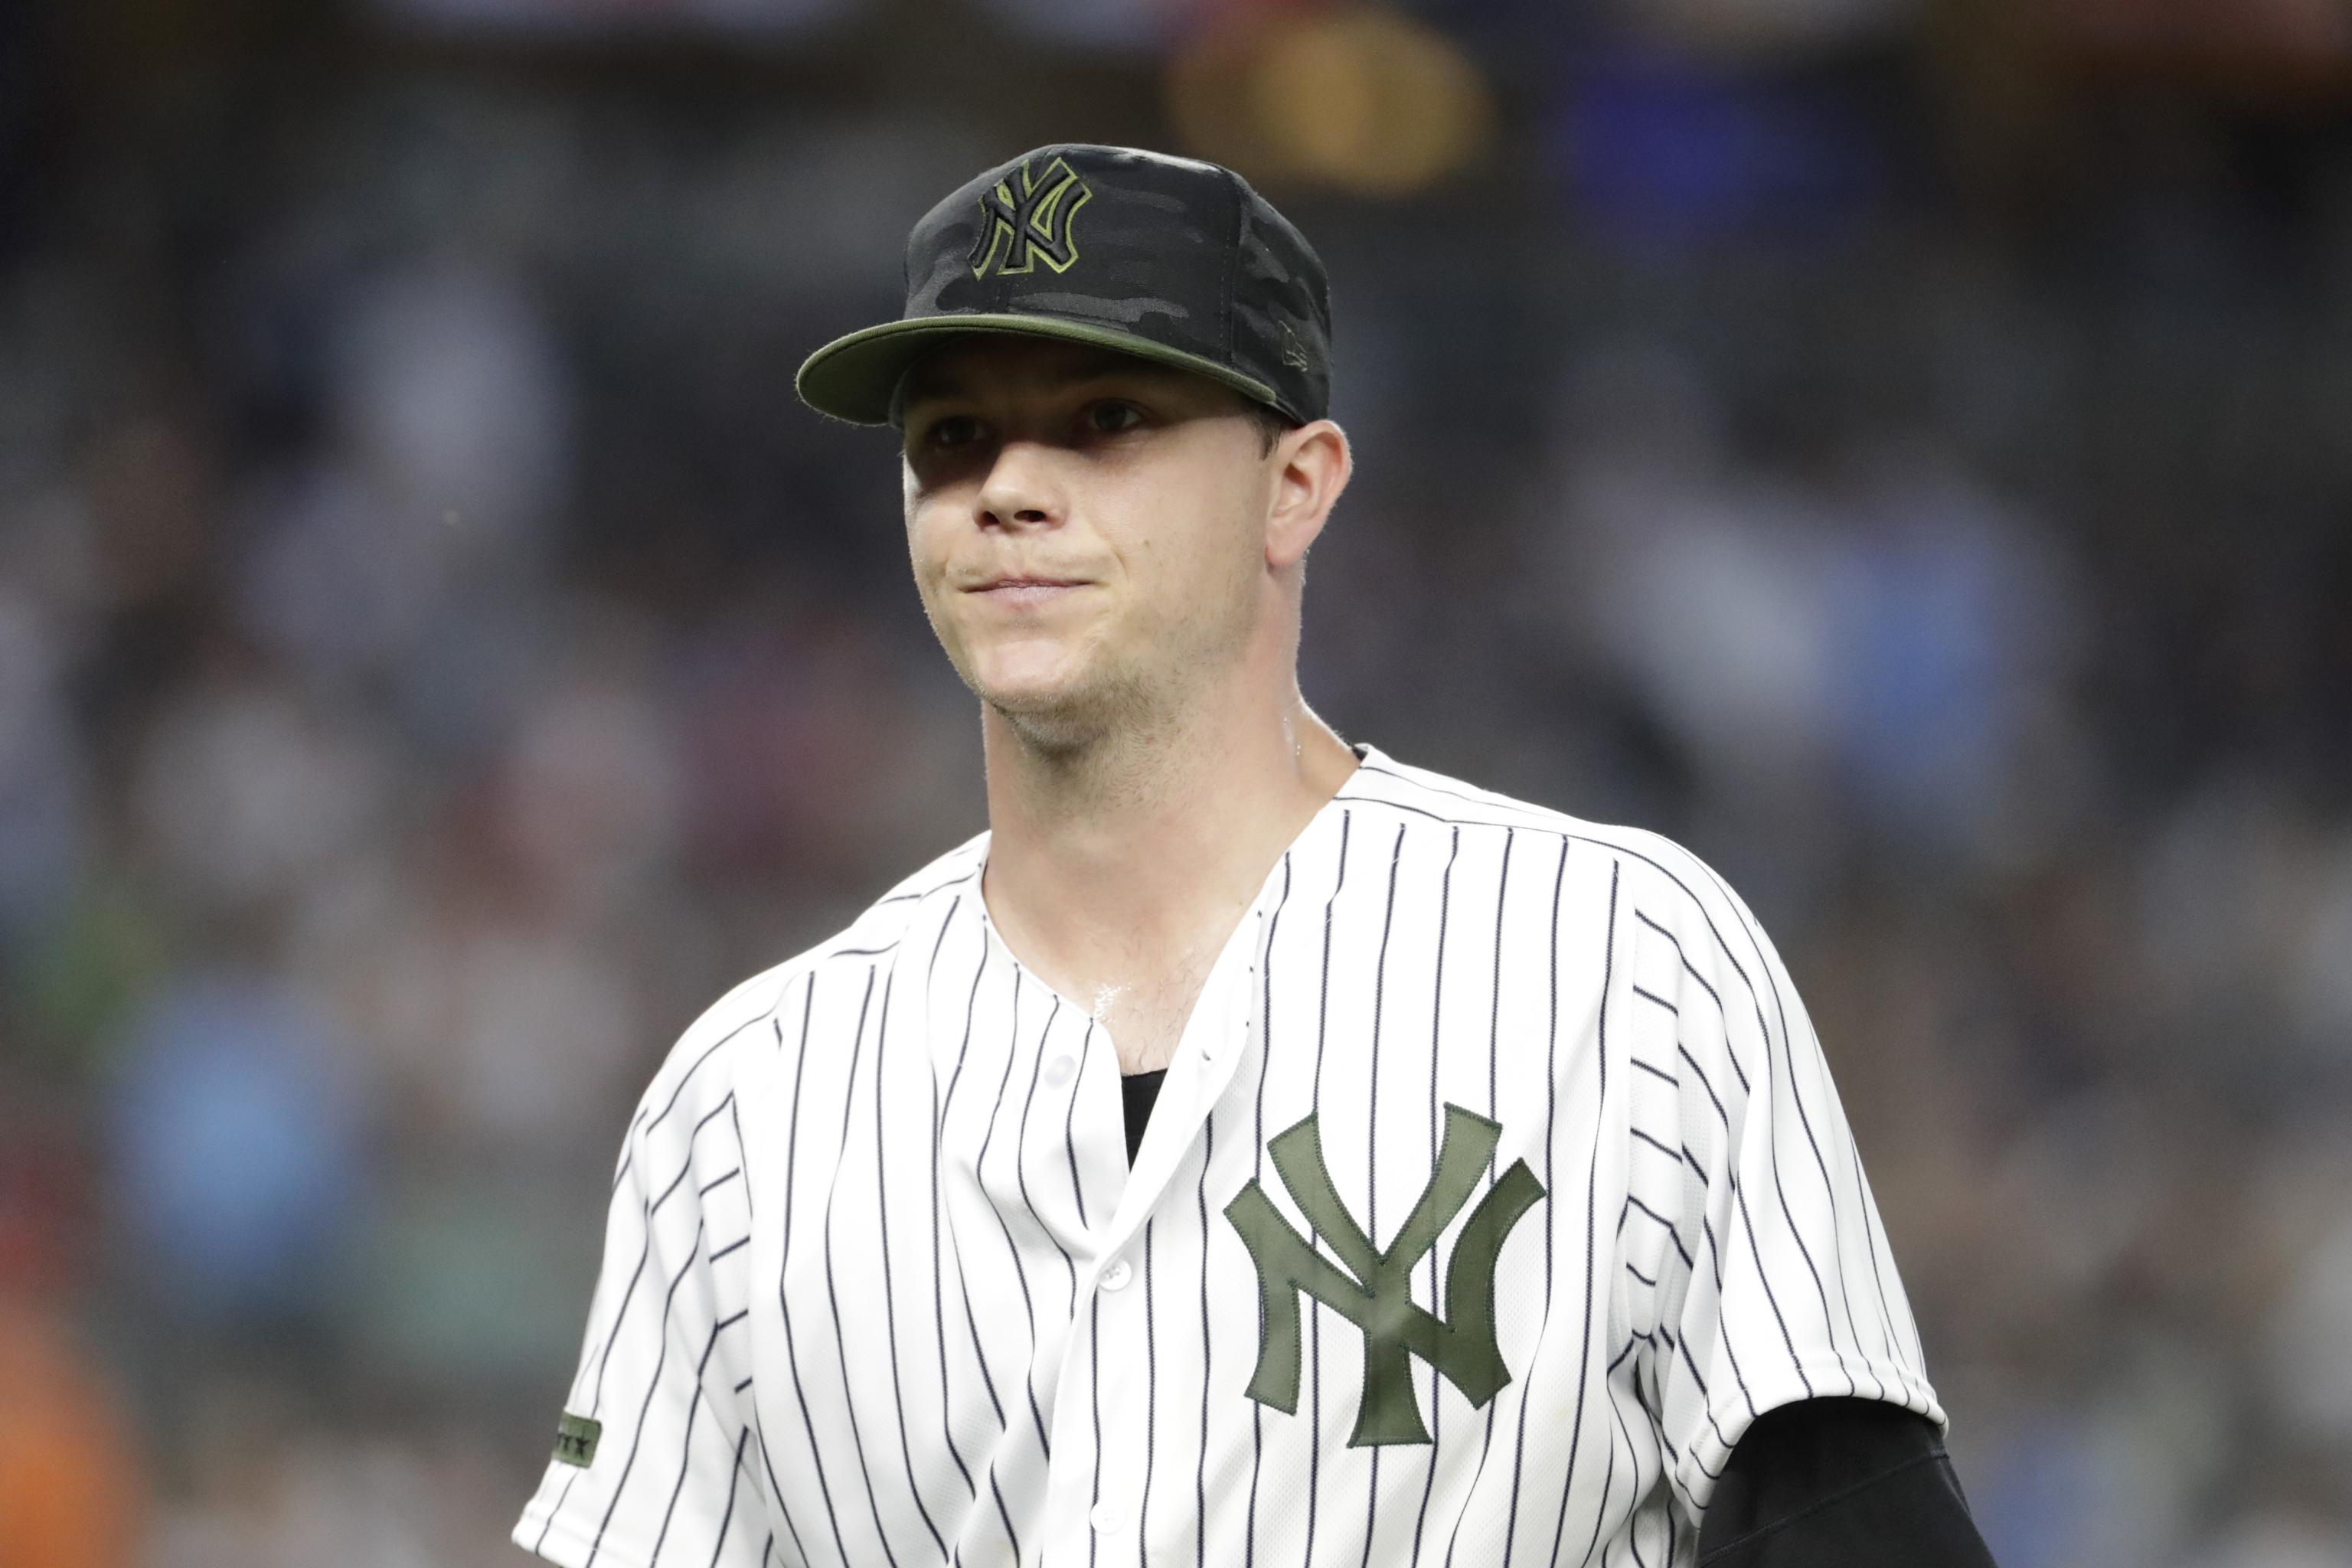 Against Lowly Orioles, Sonny Gray Drags the Yankees Even Lower